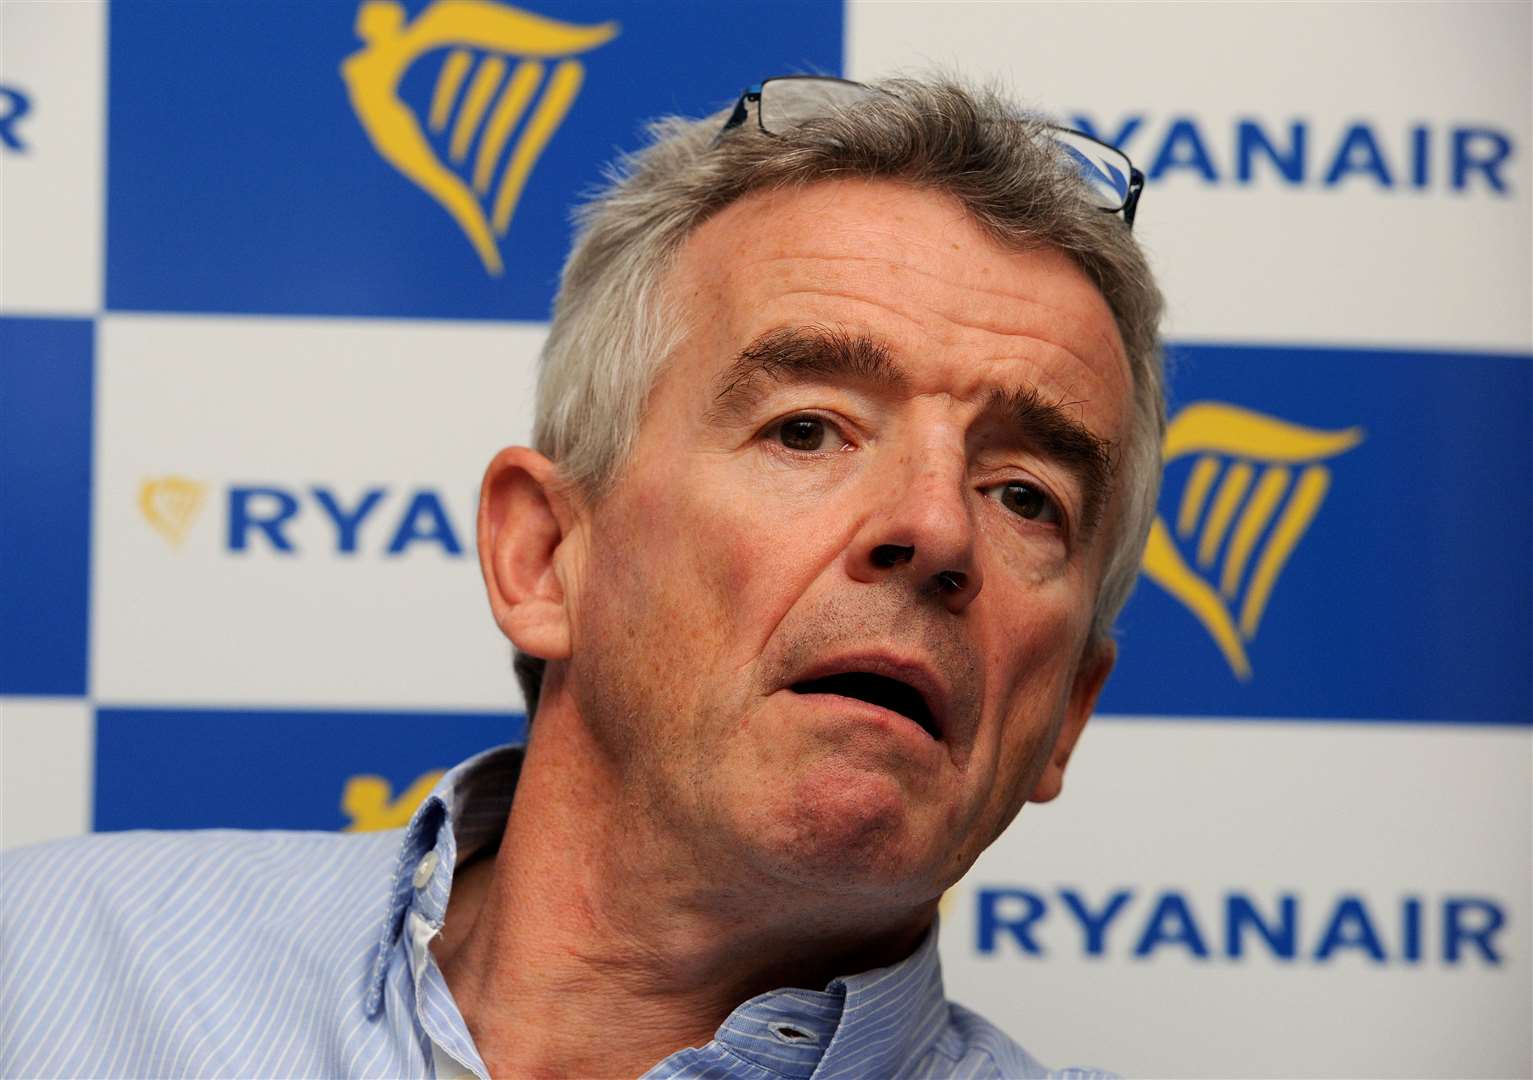 Ryanair’s chief executive Michael O’Leary (Nick Ansell/PA)